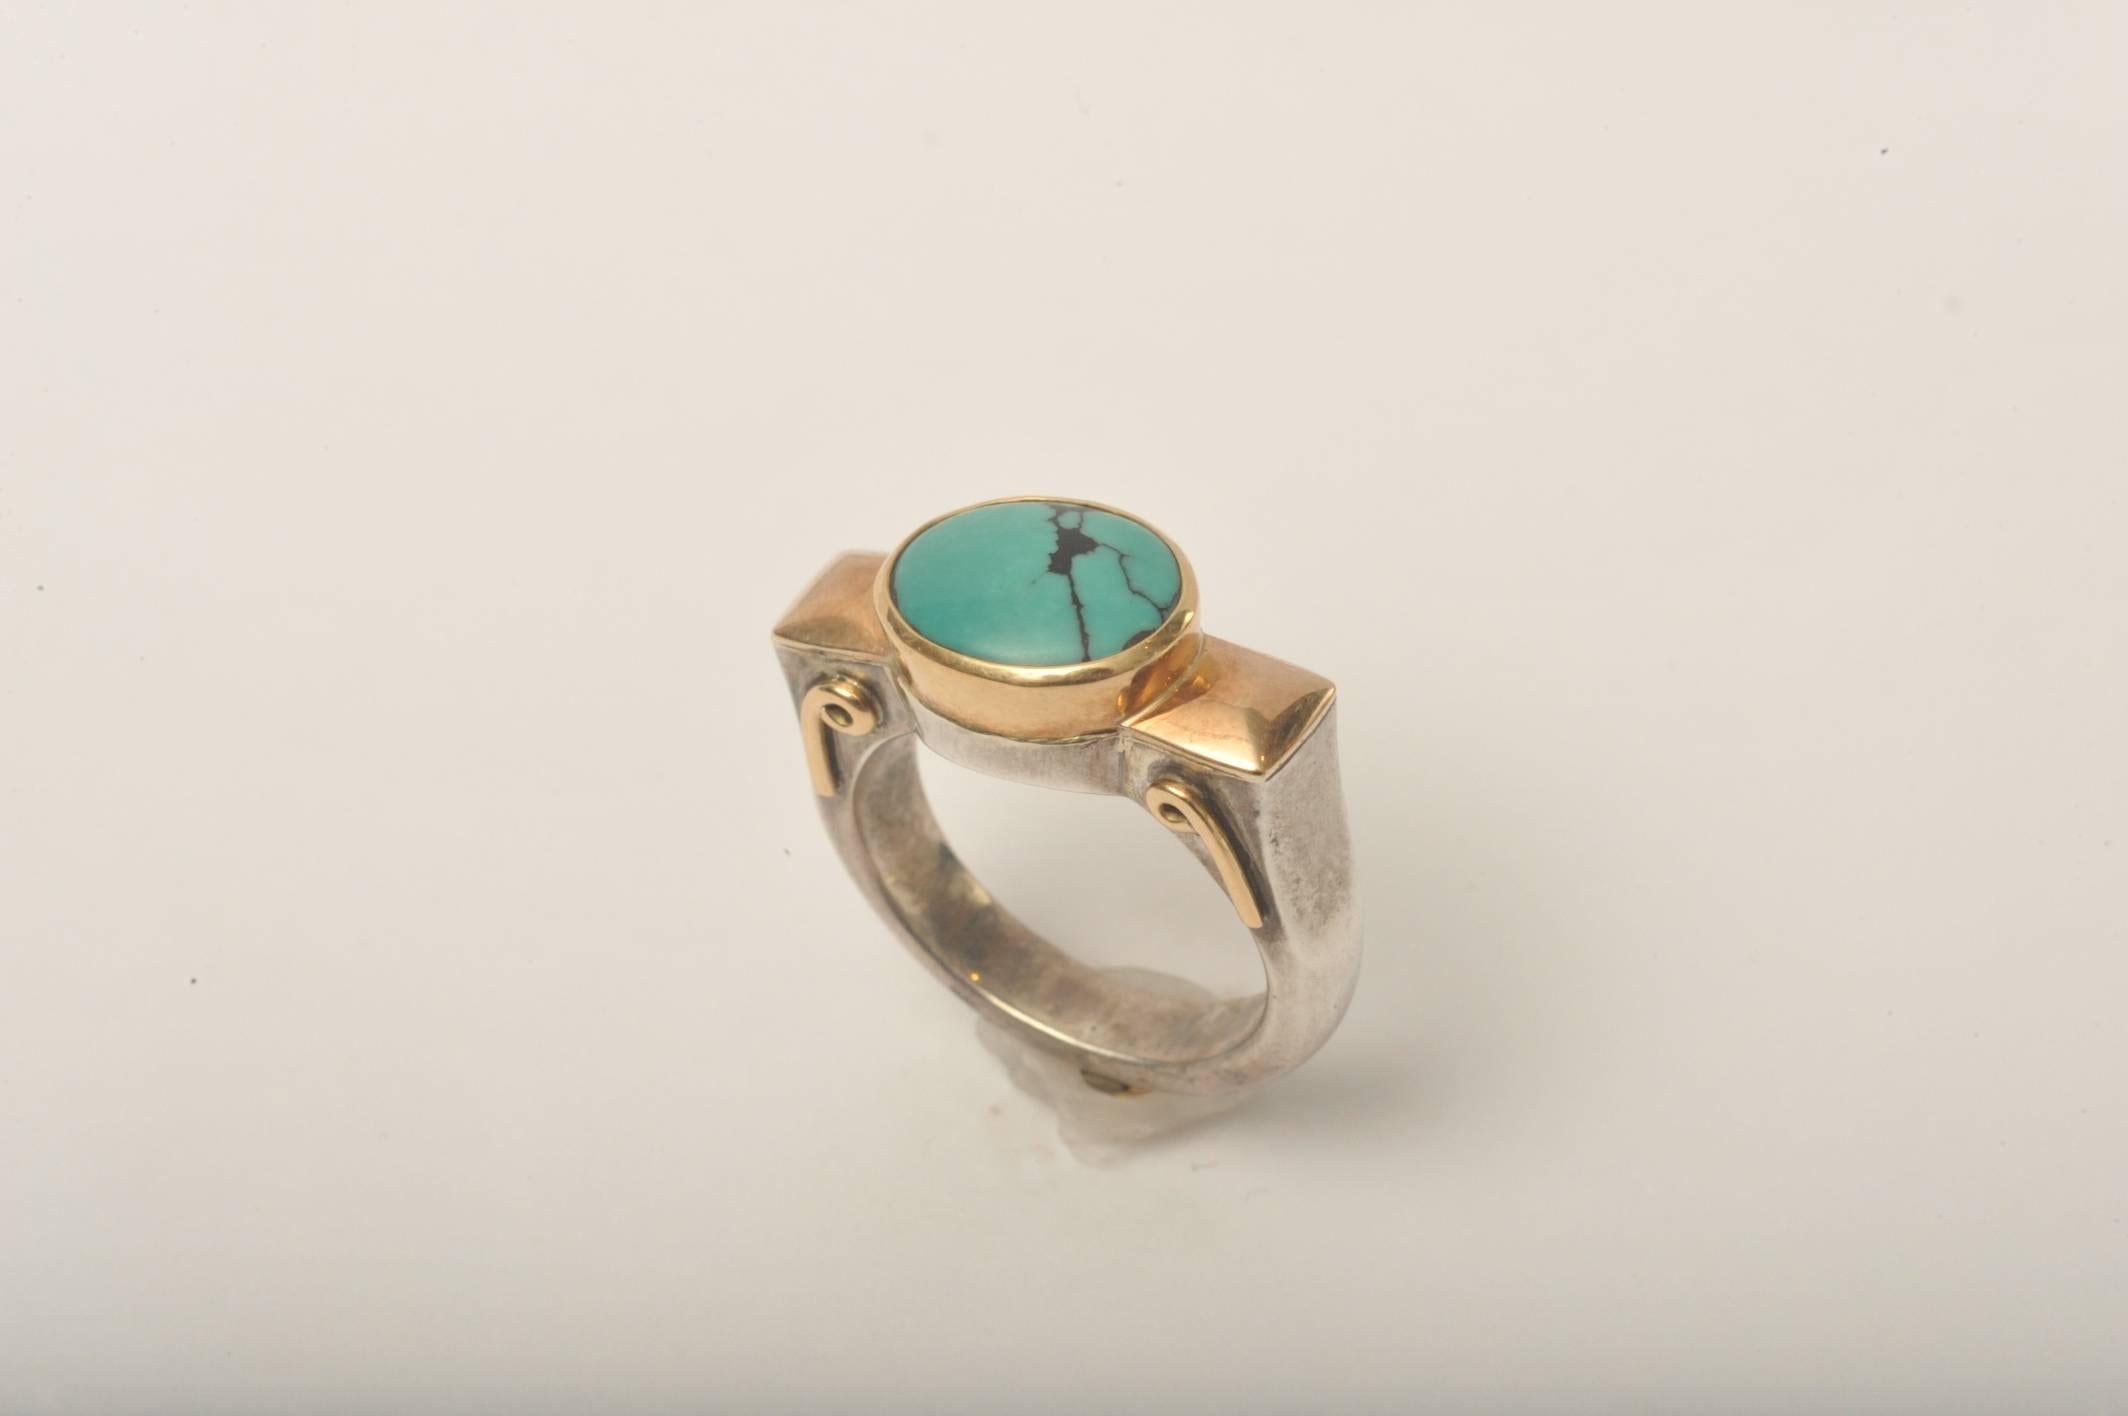 A handsome ring of Tibetan turquoise with matrix set in a weighted (not plated) 18K gold and sterling silver combination.  Ring size is 6.25.